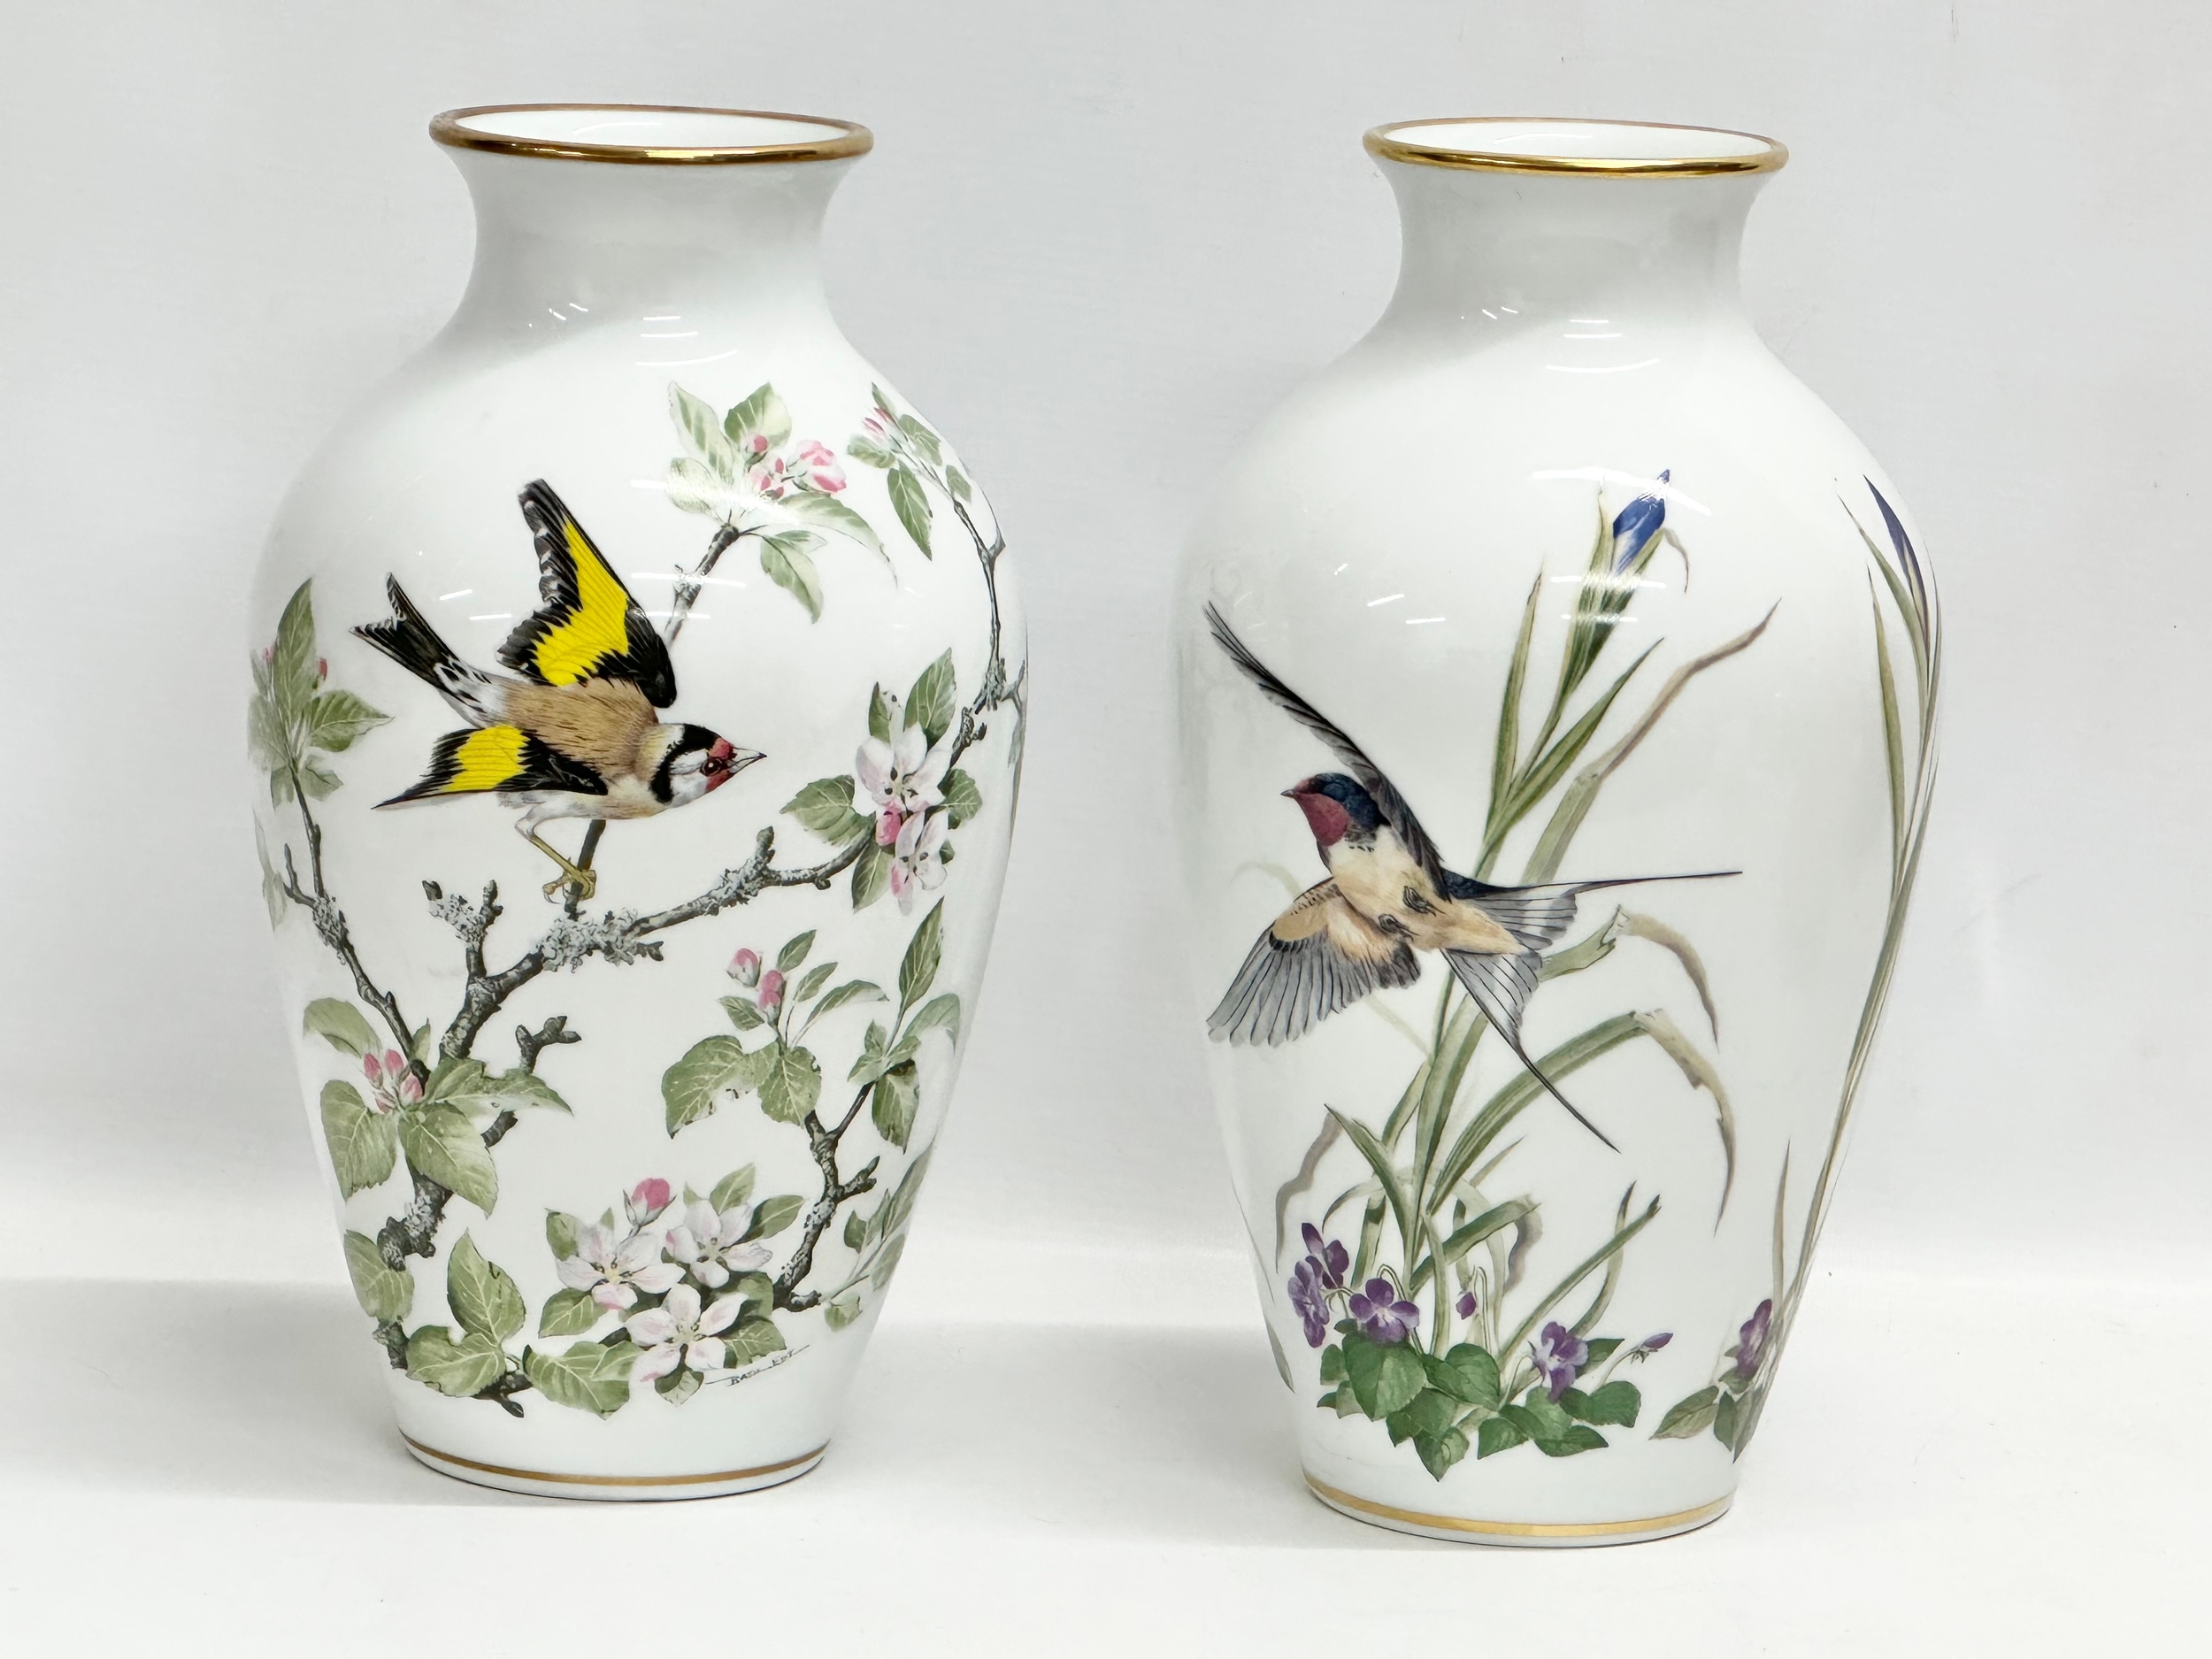 A pair of Limited Edition ‘The Meadowland Bird’ vases designed by Basil Ede for Franklin Mint. 1980.